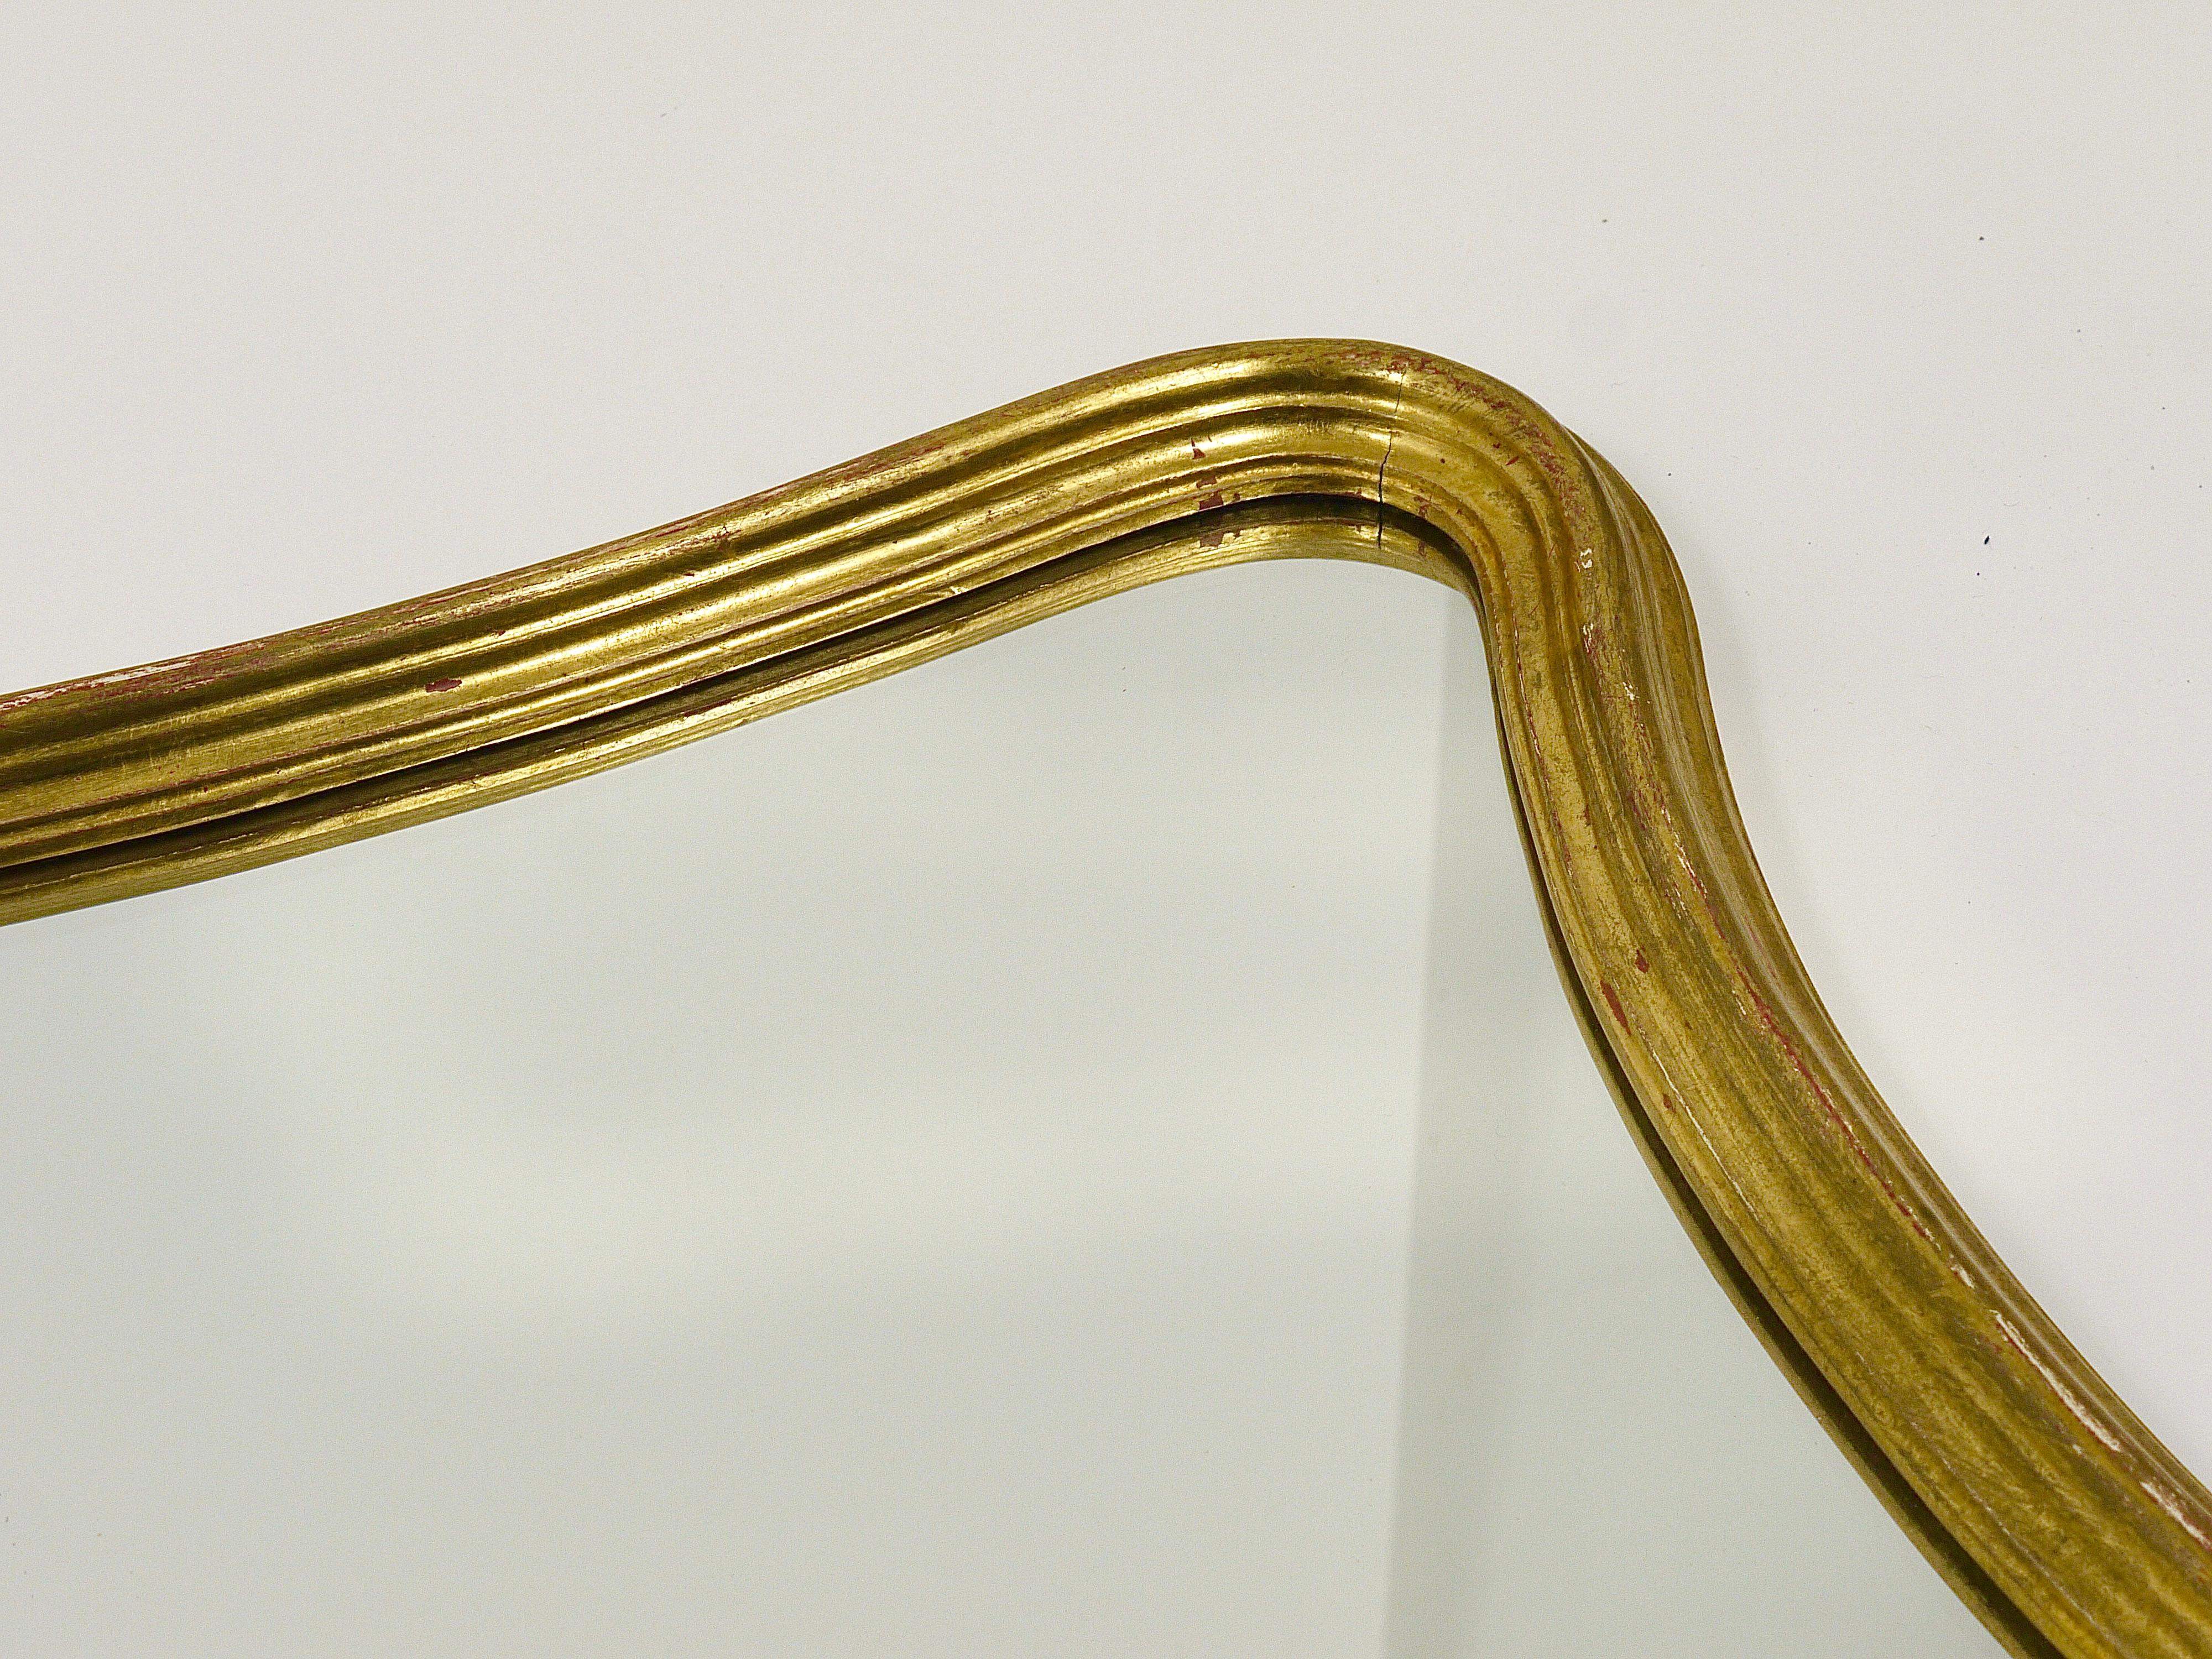 Chelini Firenze Curved Gilt Wood Mid-Century Wall Mirror, Italy, 1950s For Sale 1